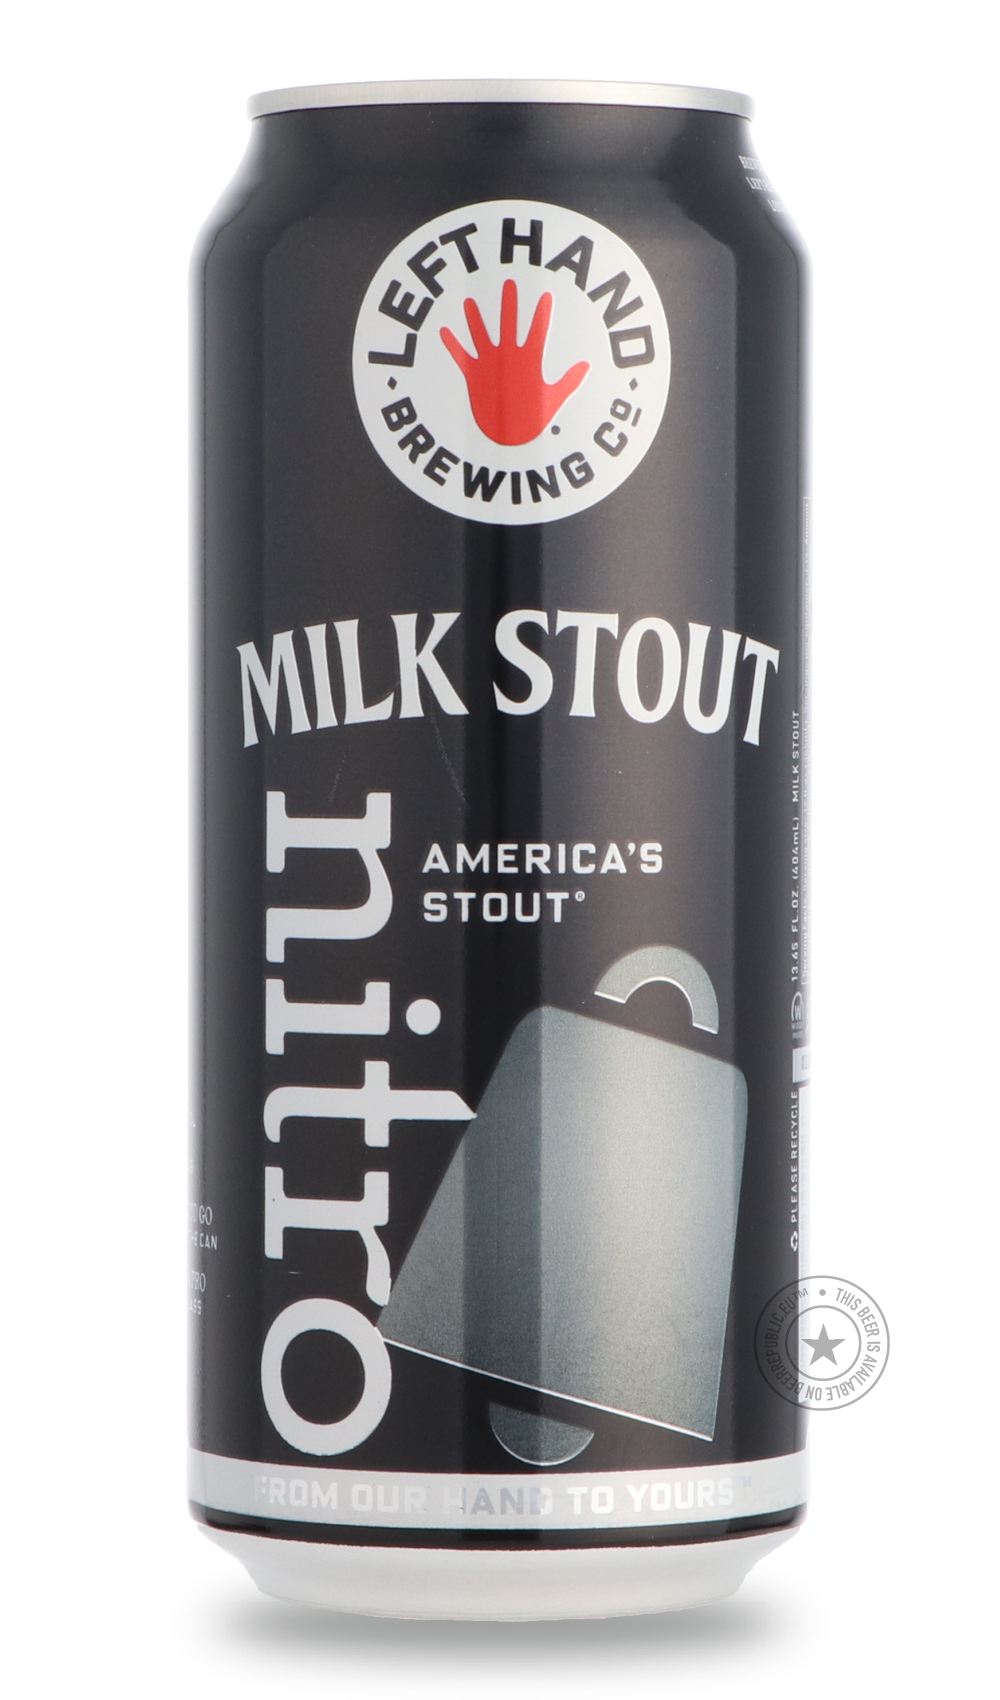 -Left Hand- Milk Stout Nitro-Stout & Porter- Only @ Beer Republic - The best online beer store for American & Canadian craft beer - Buy beer online from the USA and Canada - Bier online kopen - Amerikaans bier kopen - Craft beer store - Craft beer kopen - Amerikanisch bier kaufen - Bier online kaufen - Acheter biere online - IPA - Stout - Porter - New England IPA - Hazy IPA - Imperial Stout - Barrel Aged - Barrel Aged Imperial Stout - Brown - Dark beer - Blond - Blonde - Pilsner - Lager - Wheat - Weizen - A